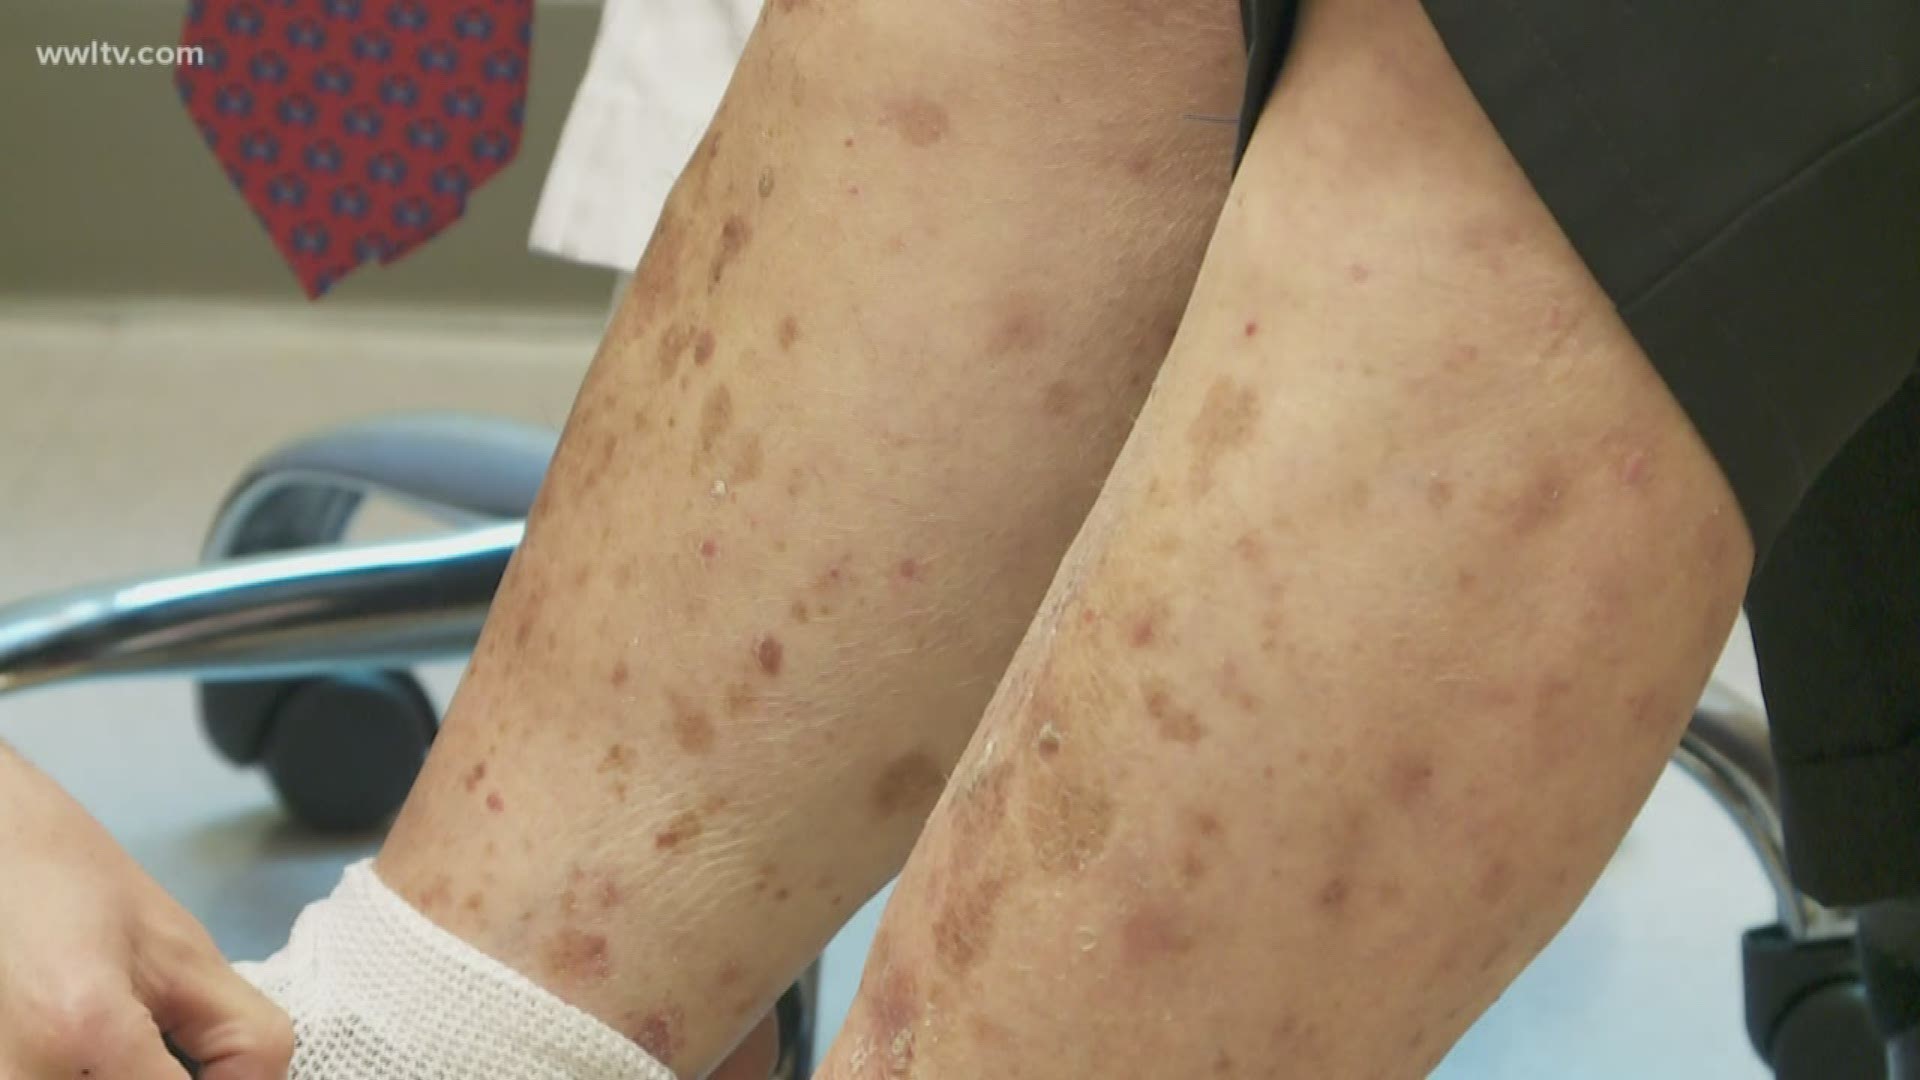 People with psoriasis use creams and pills to try and combat the constant, itchy lesions that pop up on their skin.